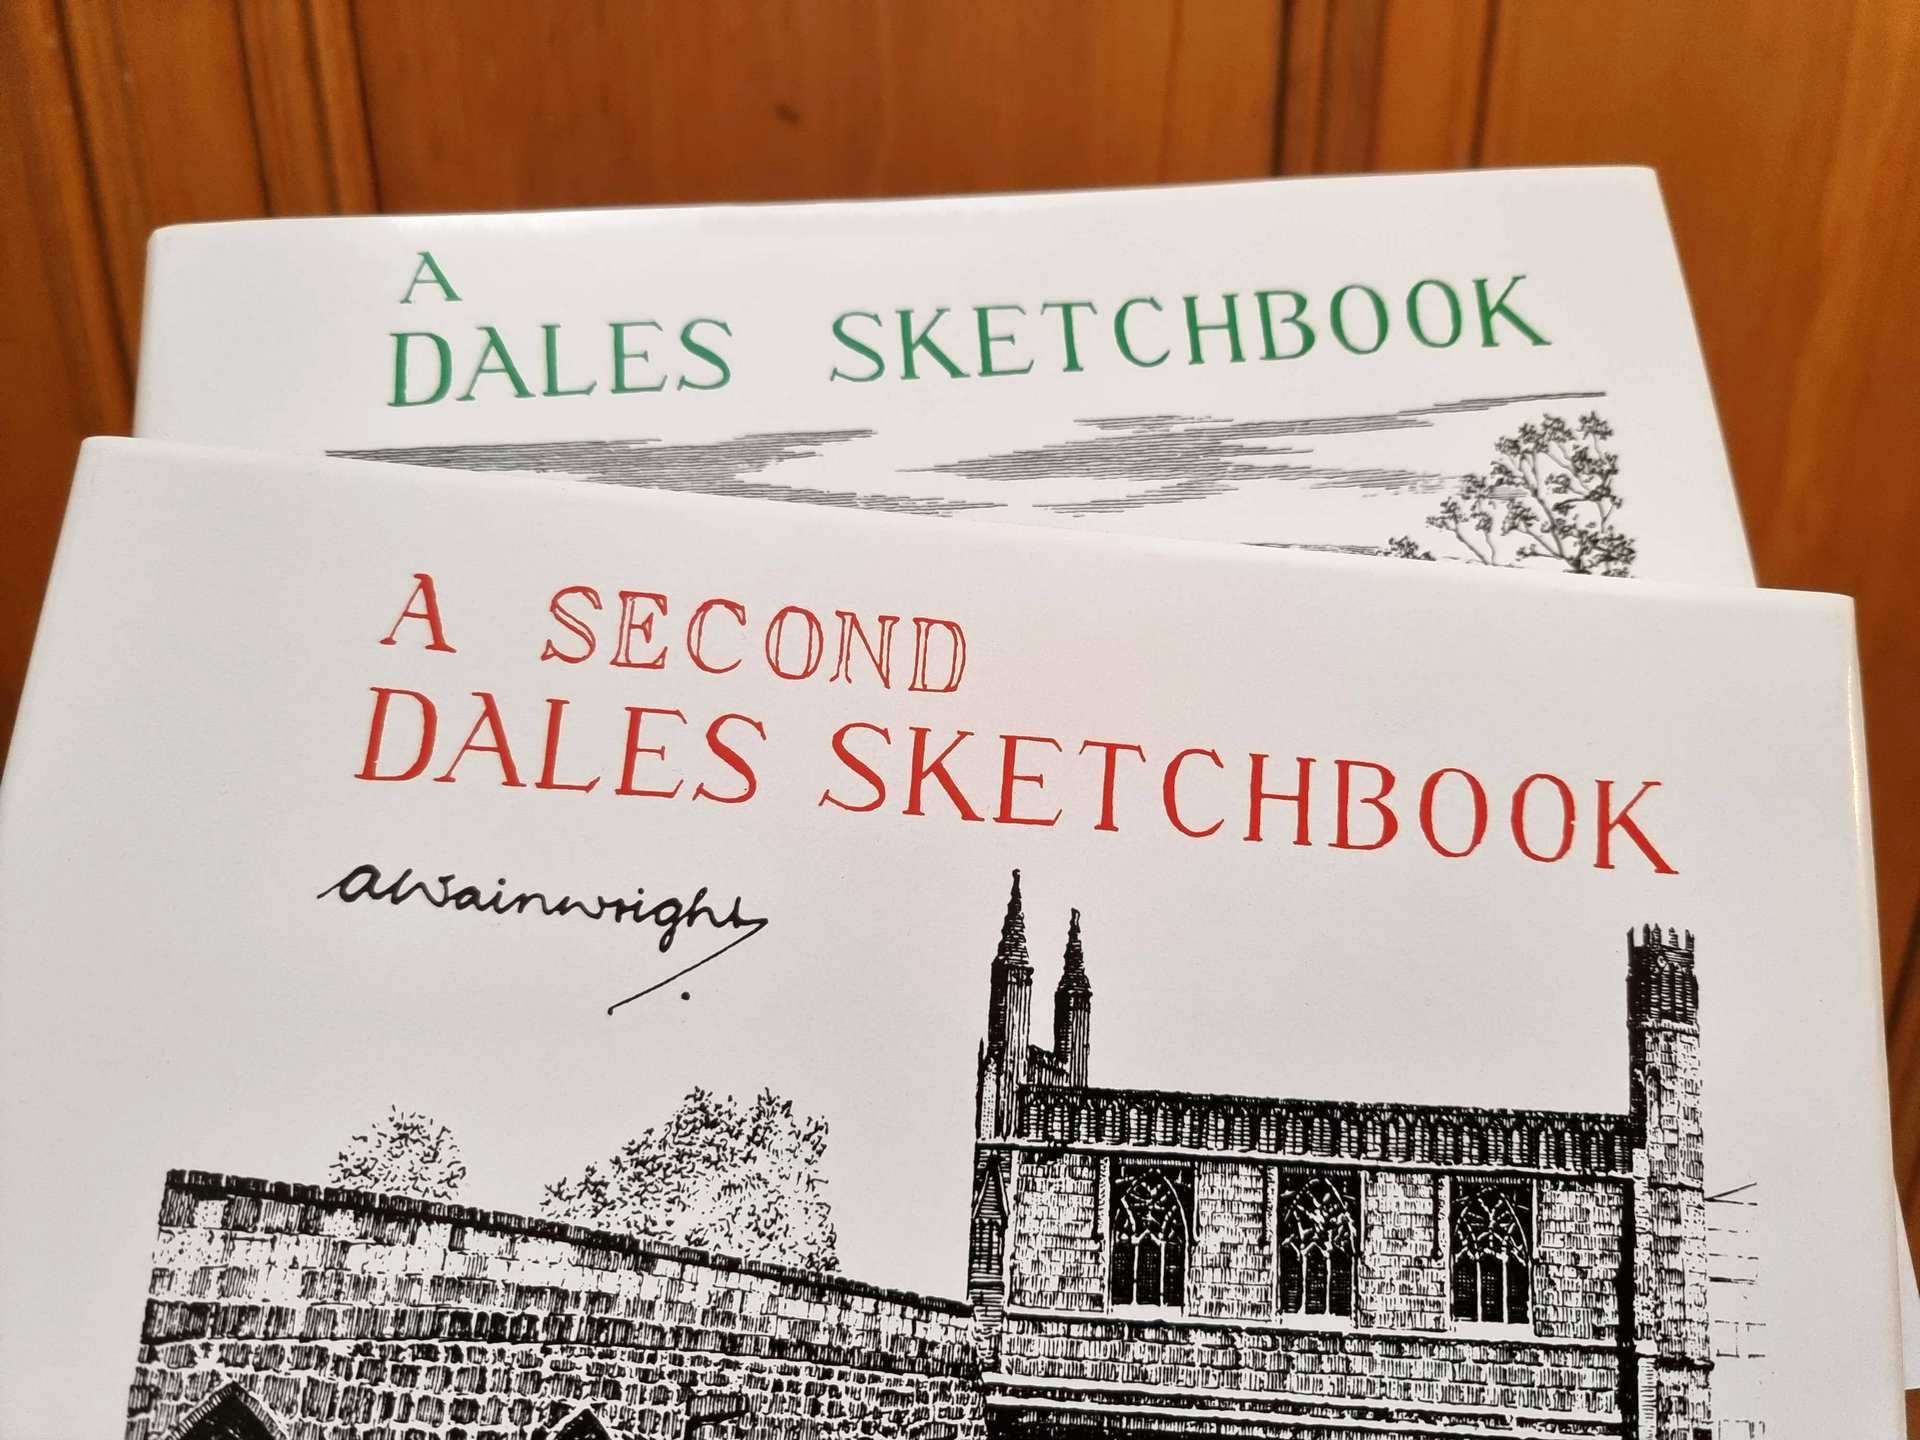 A Dales Sketchbook Collection